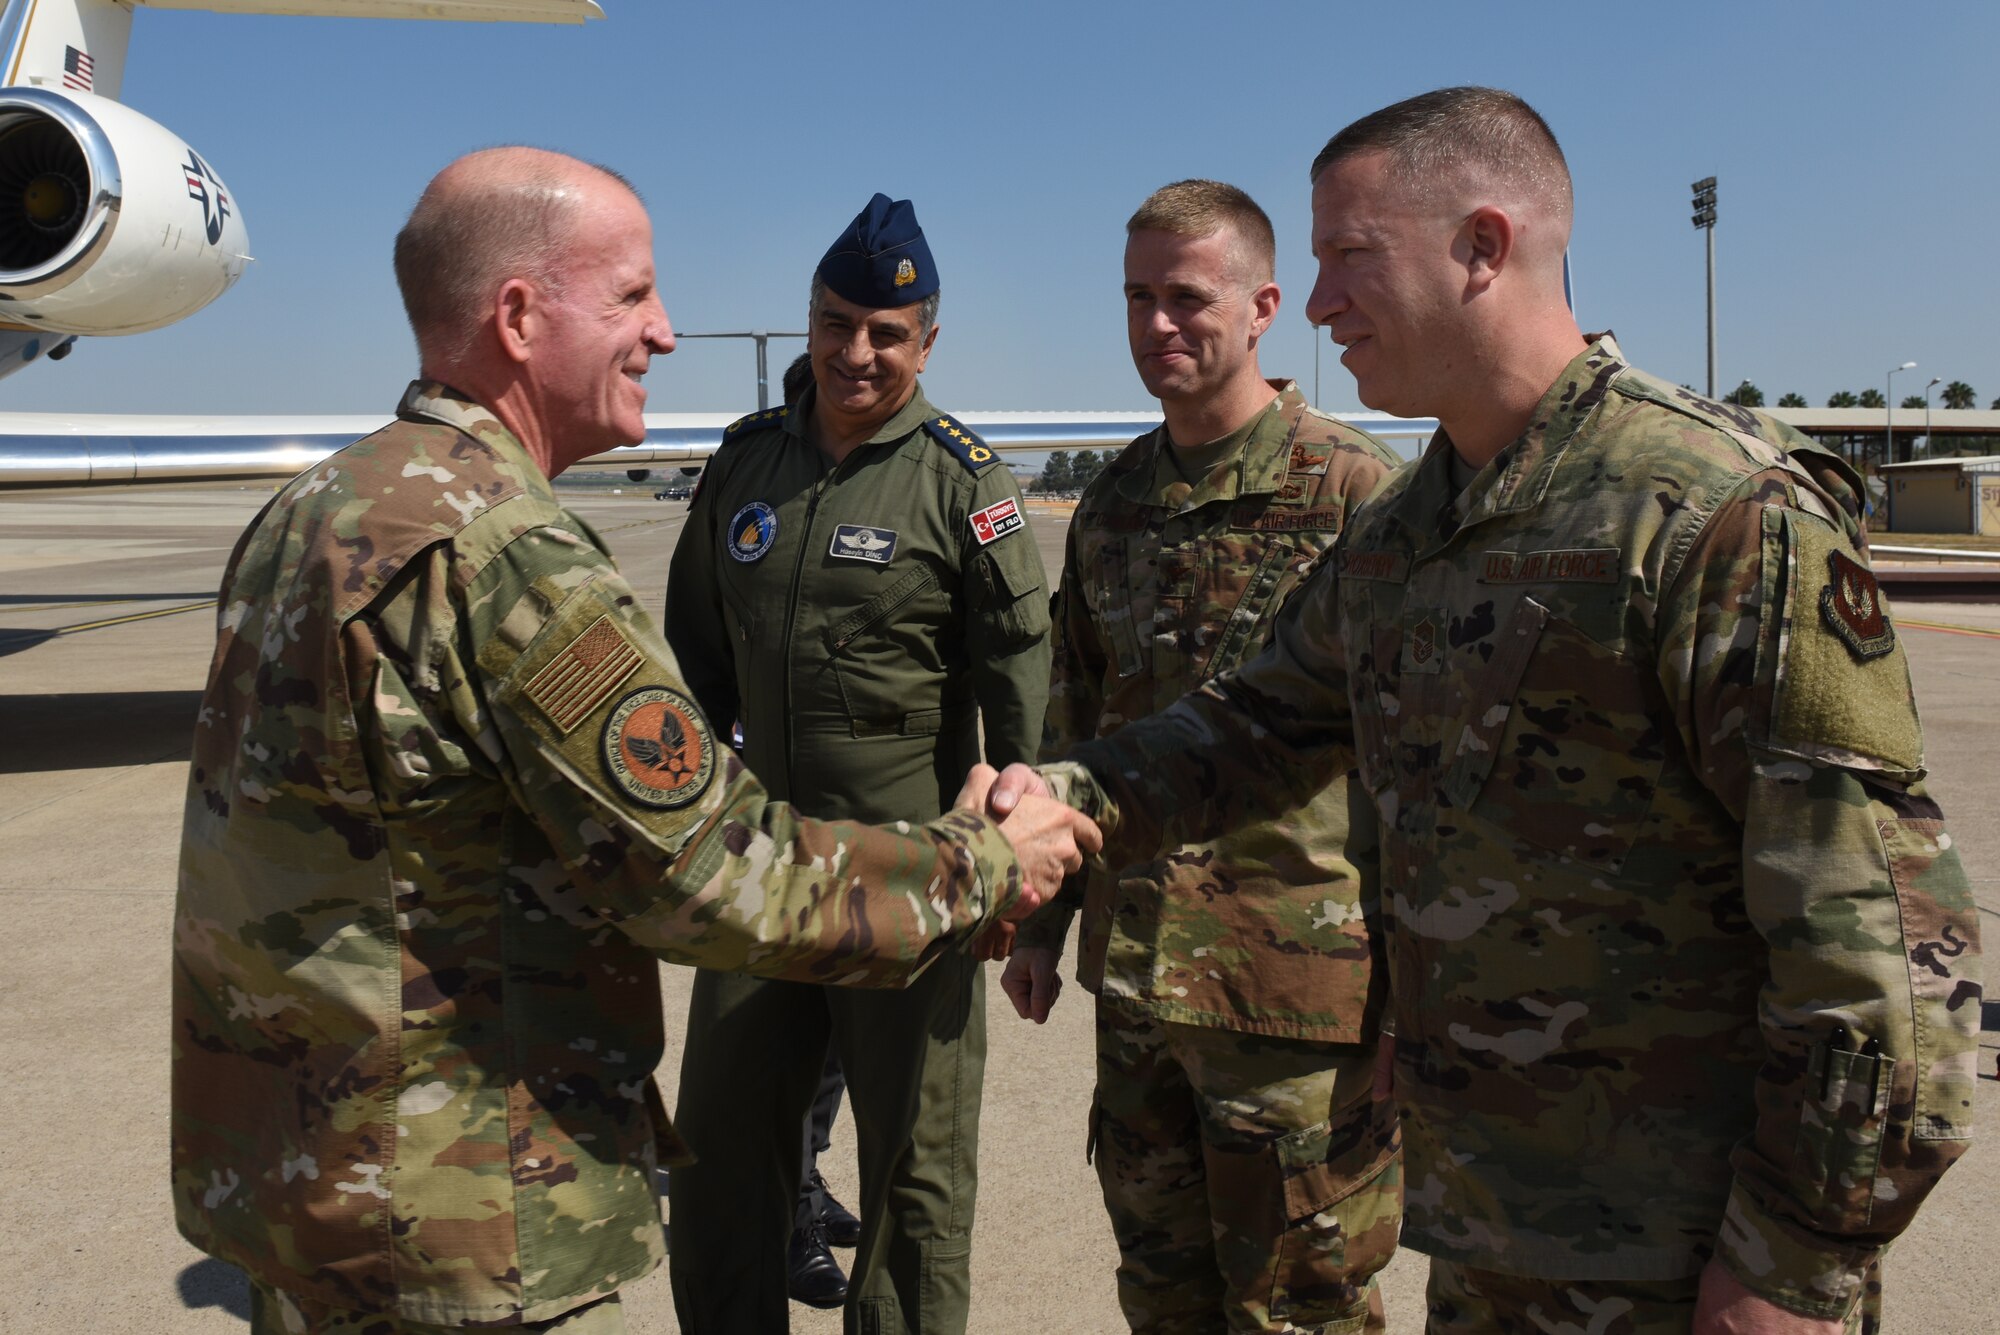 U.S. Air Force Vice Chief of Staff Ge. Stephen W. Wilson, left, shakes hands with U.S. and Turkish air force leadership at Incirlik Air Base, Turkey, Sept 29, 2019. Wilson's visit to Incirlik was part of a series of tours to various Air Force installations. (U.S. Air Force photo by Staff Sgt. Joshua Magbanua)